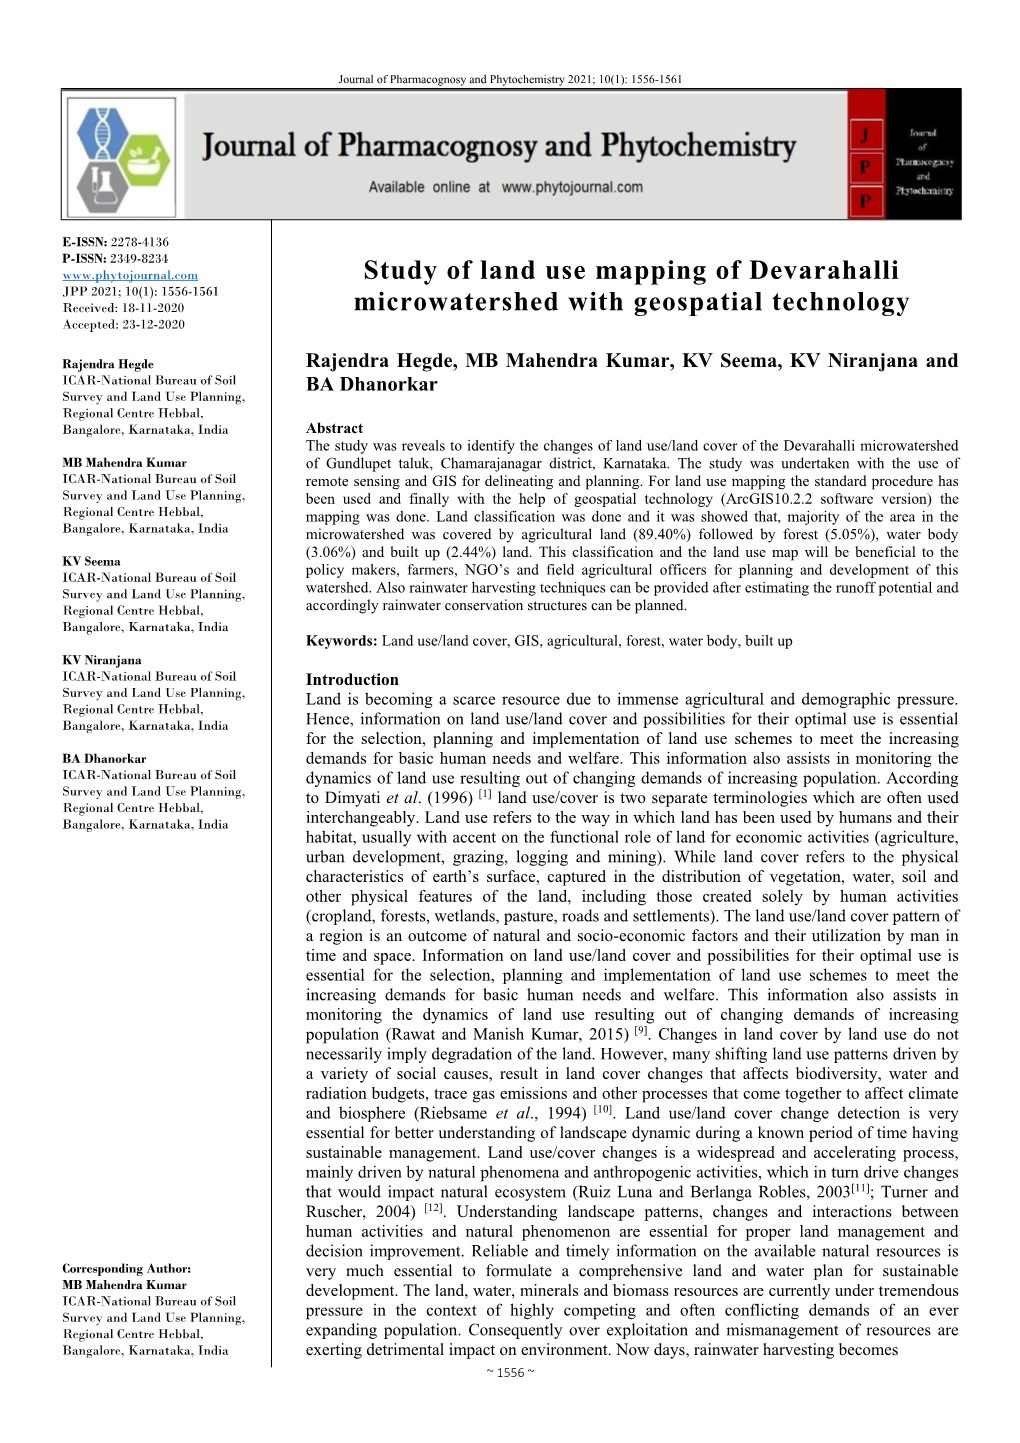 Study of Land Use Mapping of Devarahalli Microwatershed With